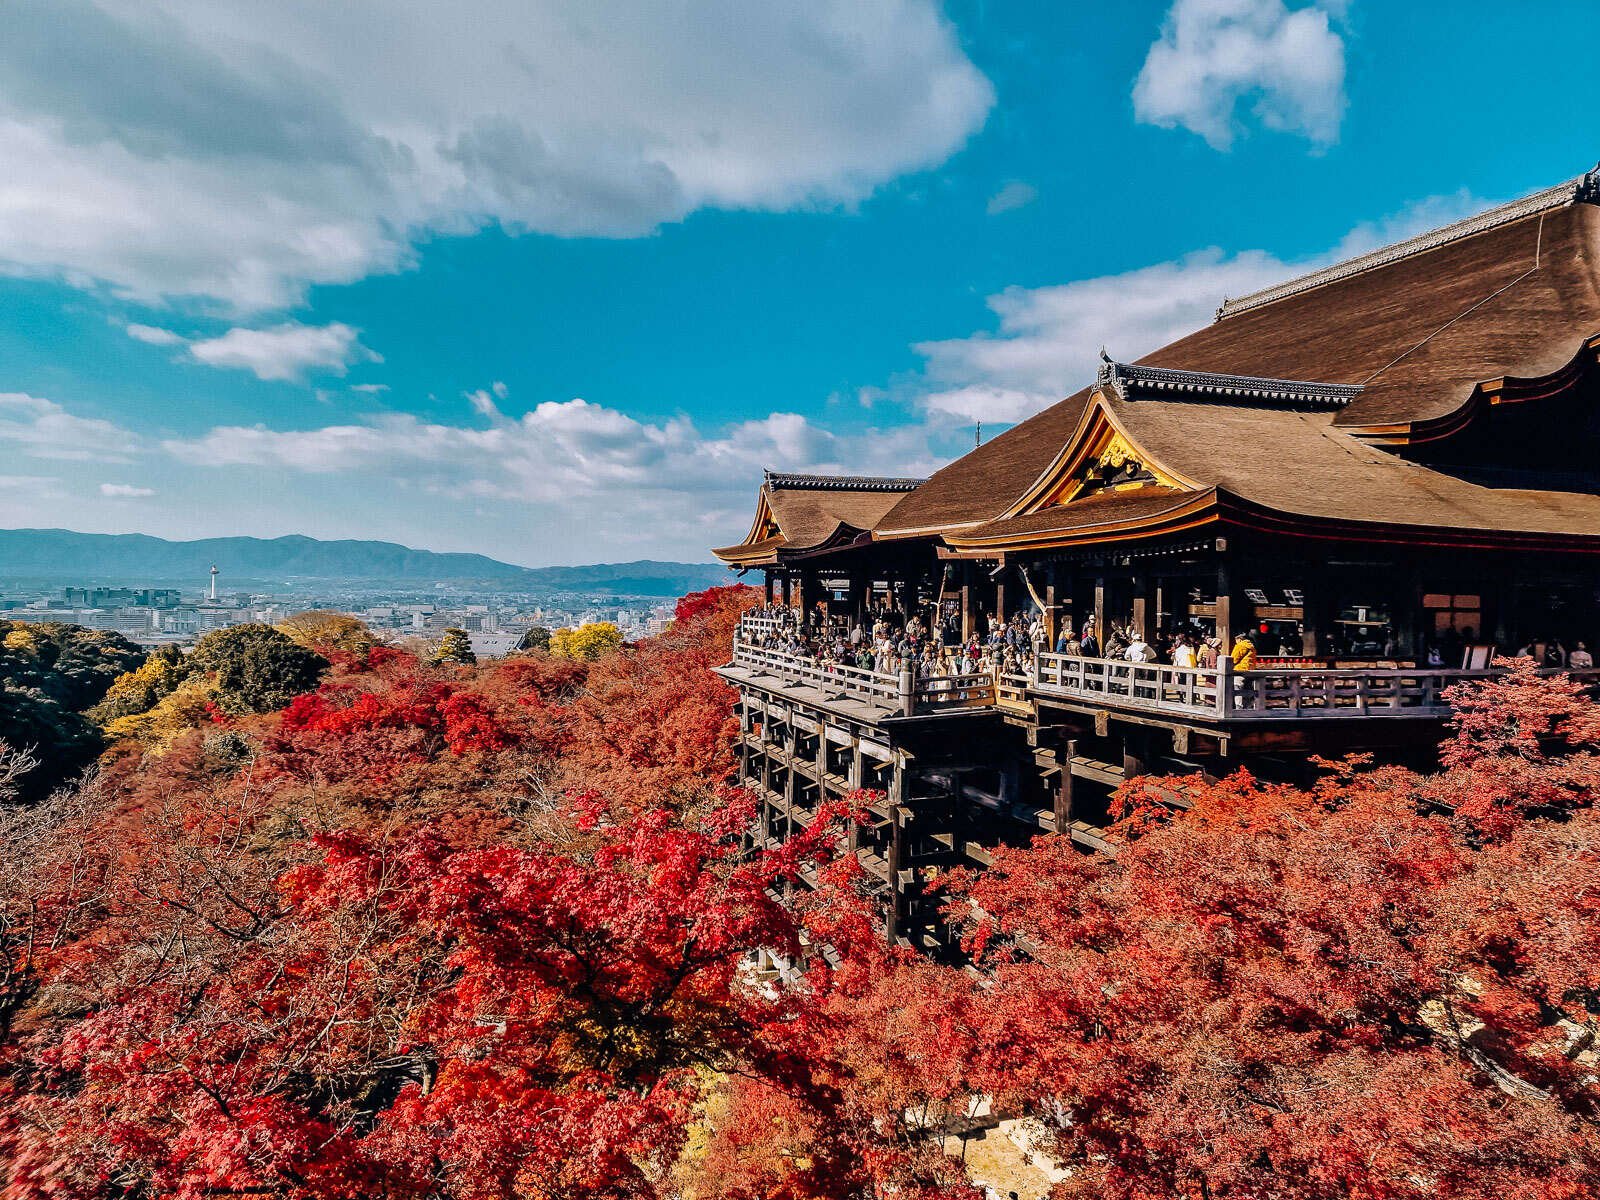 A large wooden temple on stilts surrounded by red-leaved trees with a view of Kyoto city in the distance